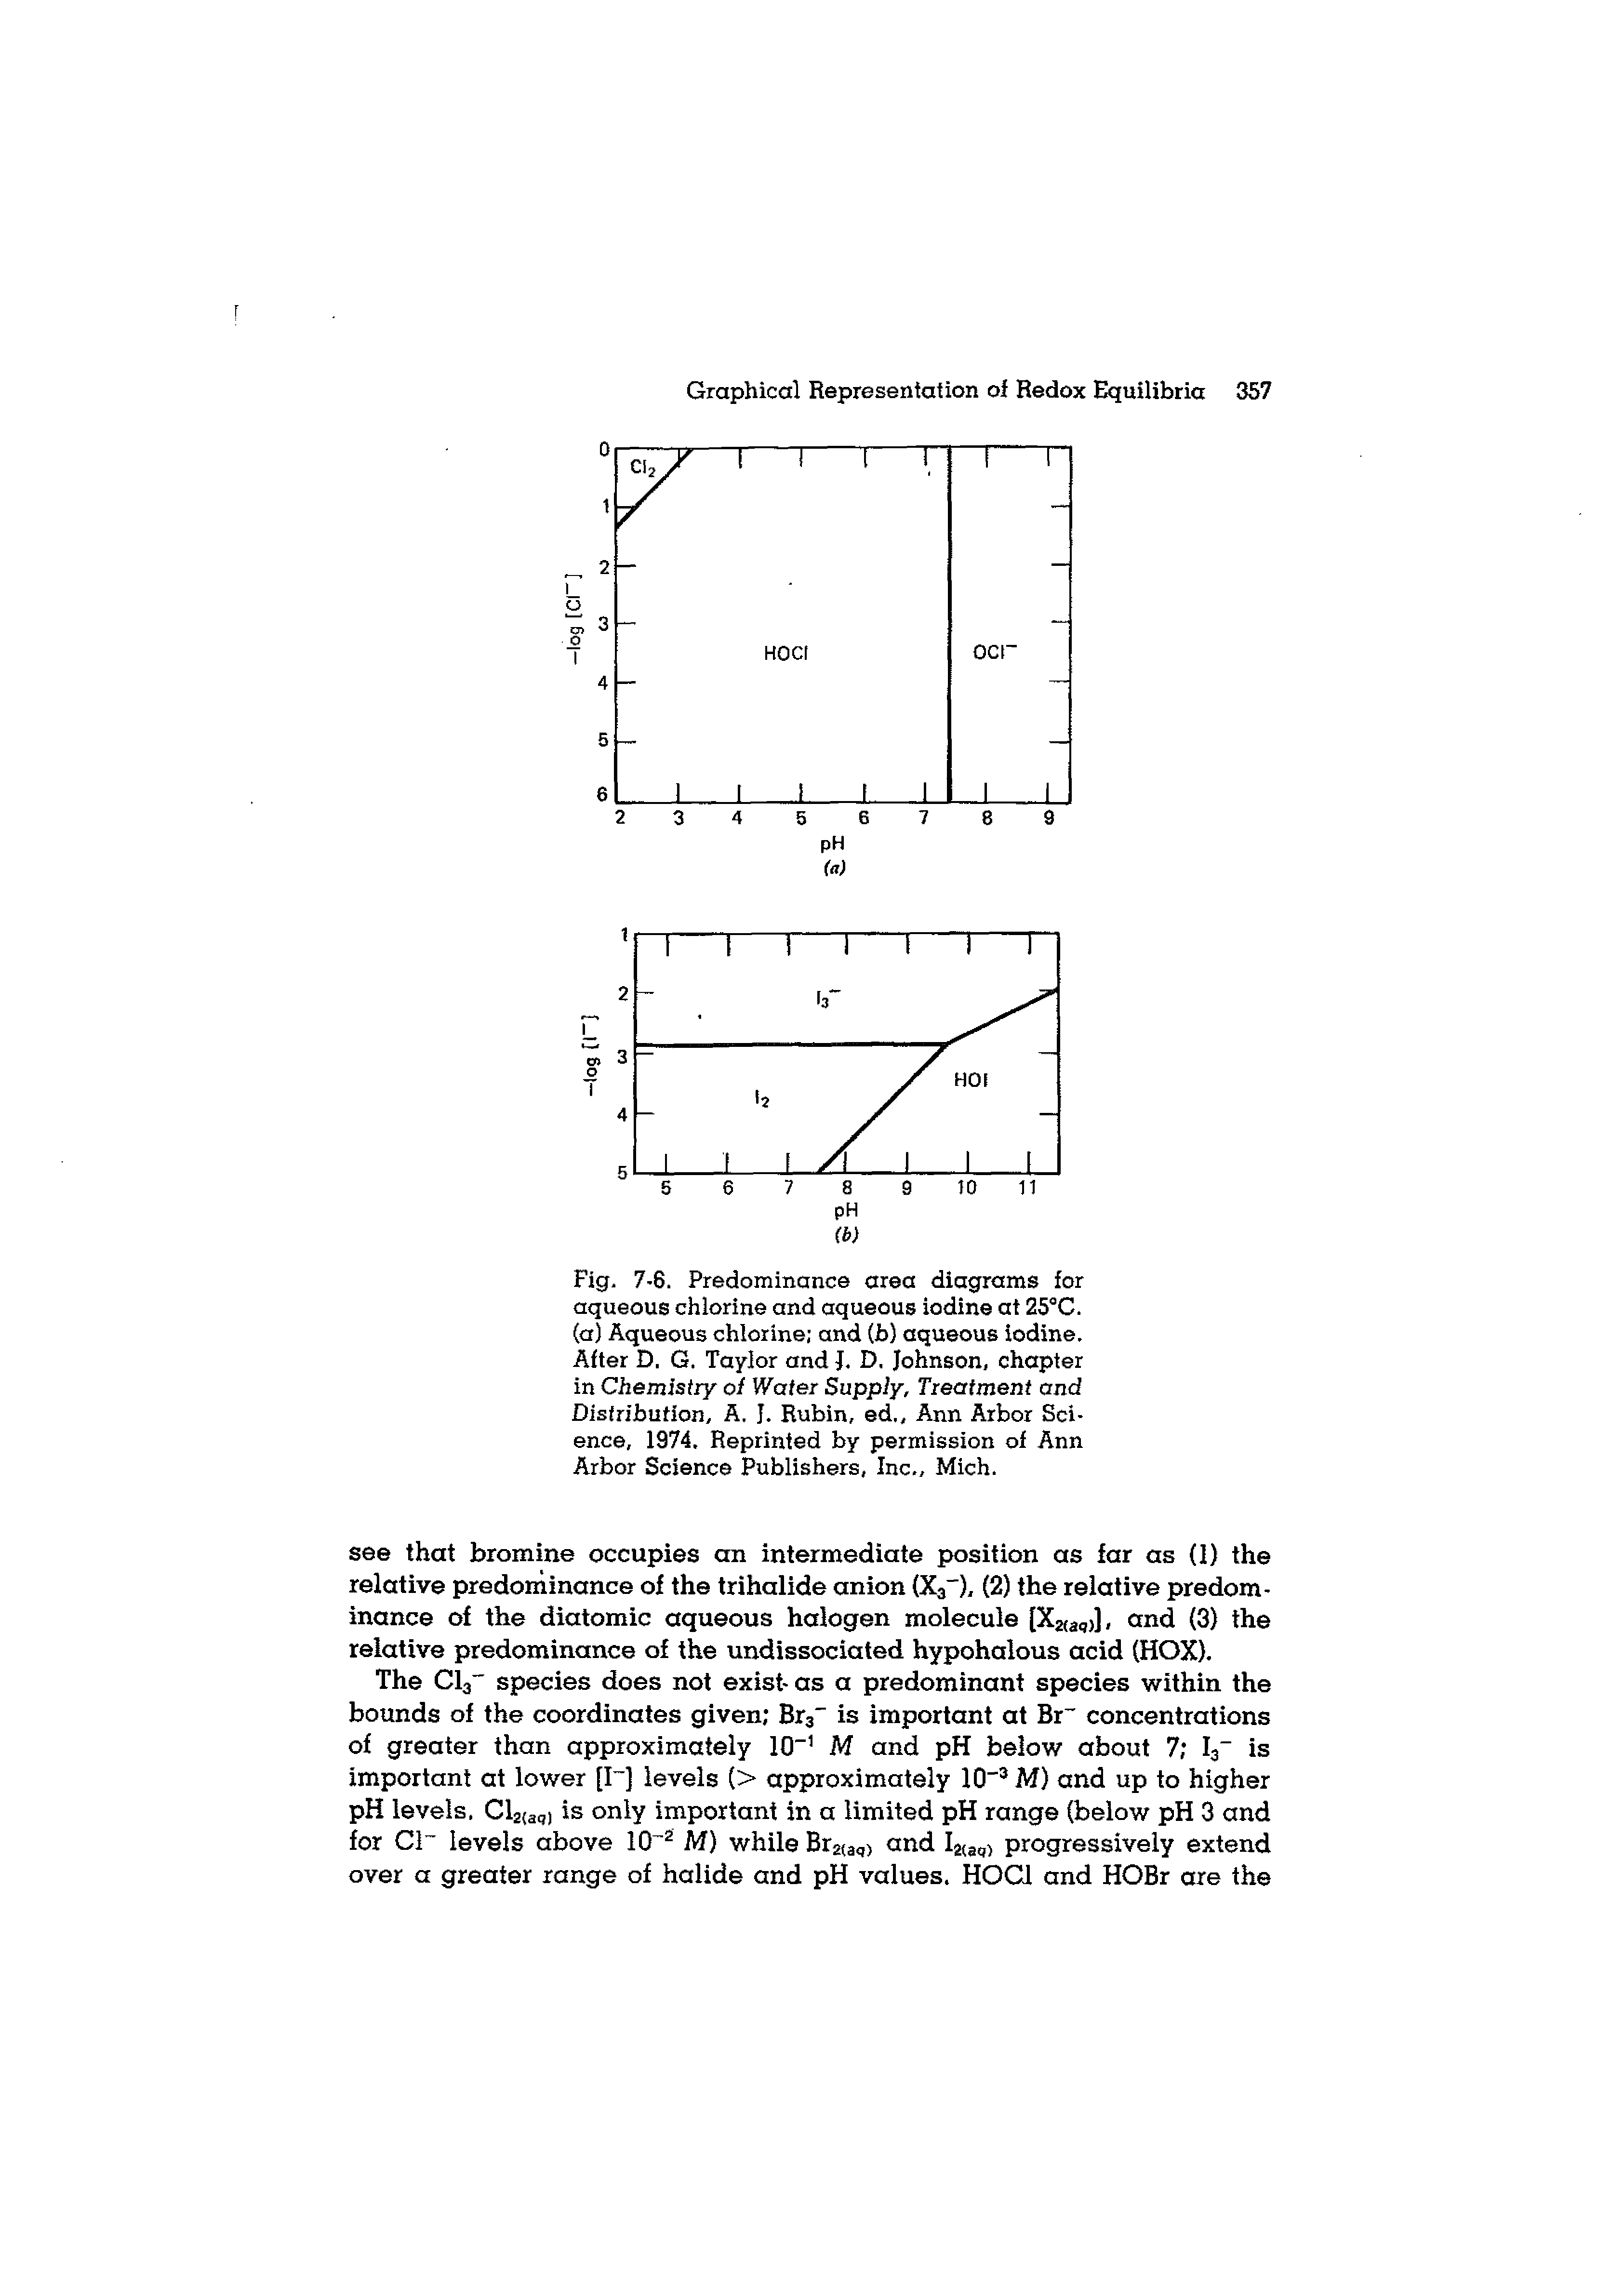 Fig. 7-6. Predominance area diagrams for aqueous chlorine and aqueous iodine at 25 C. (a) Aqueous chlorine and (b) aqueous iodine. After D. G. Taylor and J, D. Johnson, chapter in Chemistry oi Water Supply, Treatment and Distribution, A. J. Rubin, ed, Ann Arbor Science, 1974. Reprinted by permission of Ann Arbor Science Publishers, Inc, Mich.